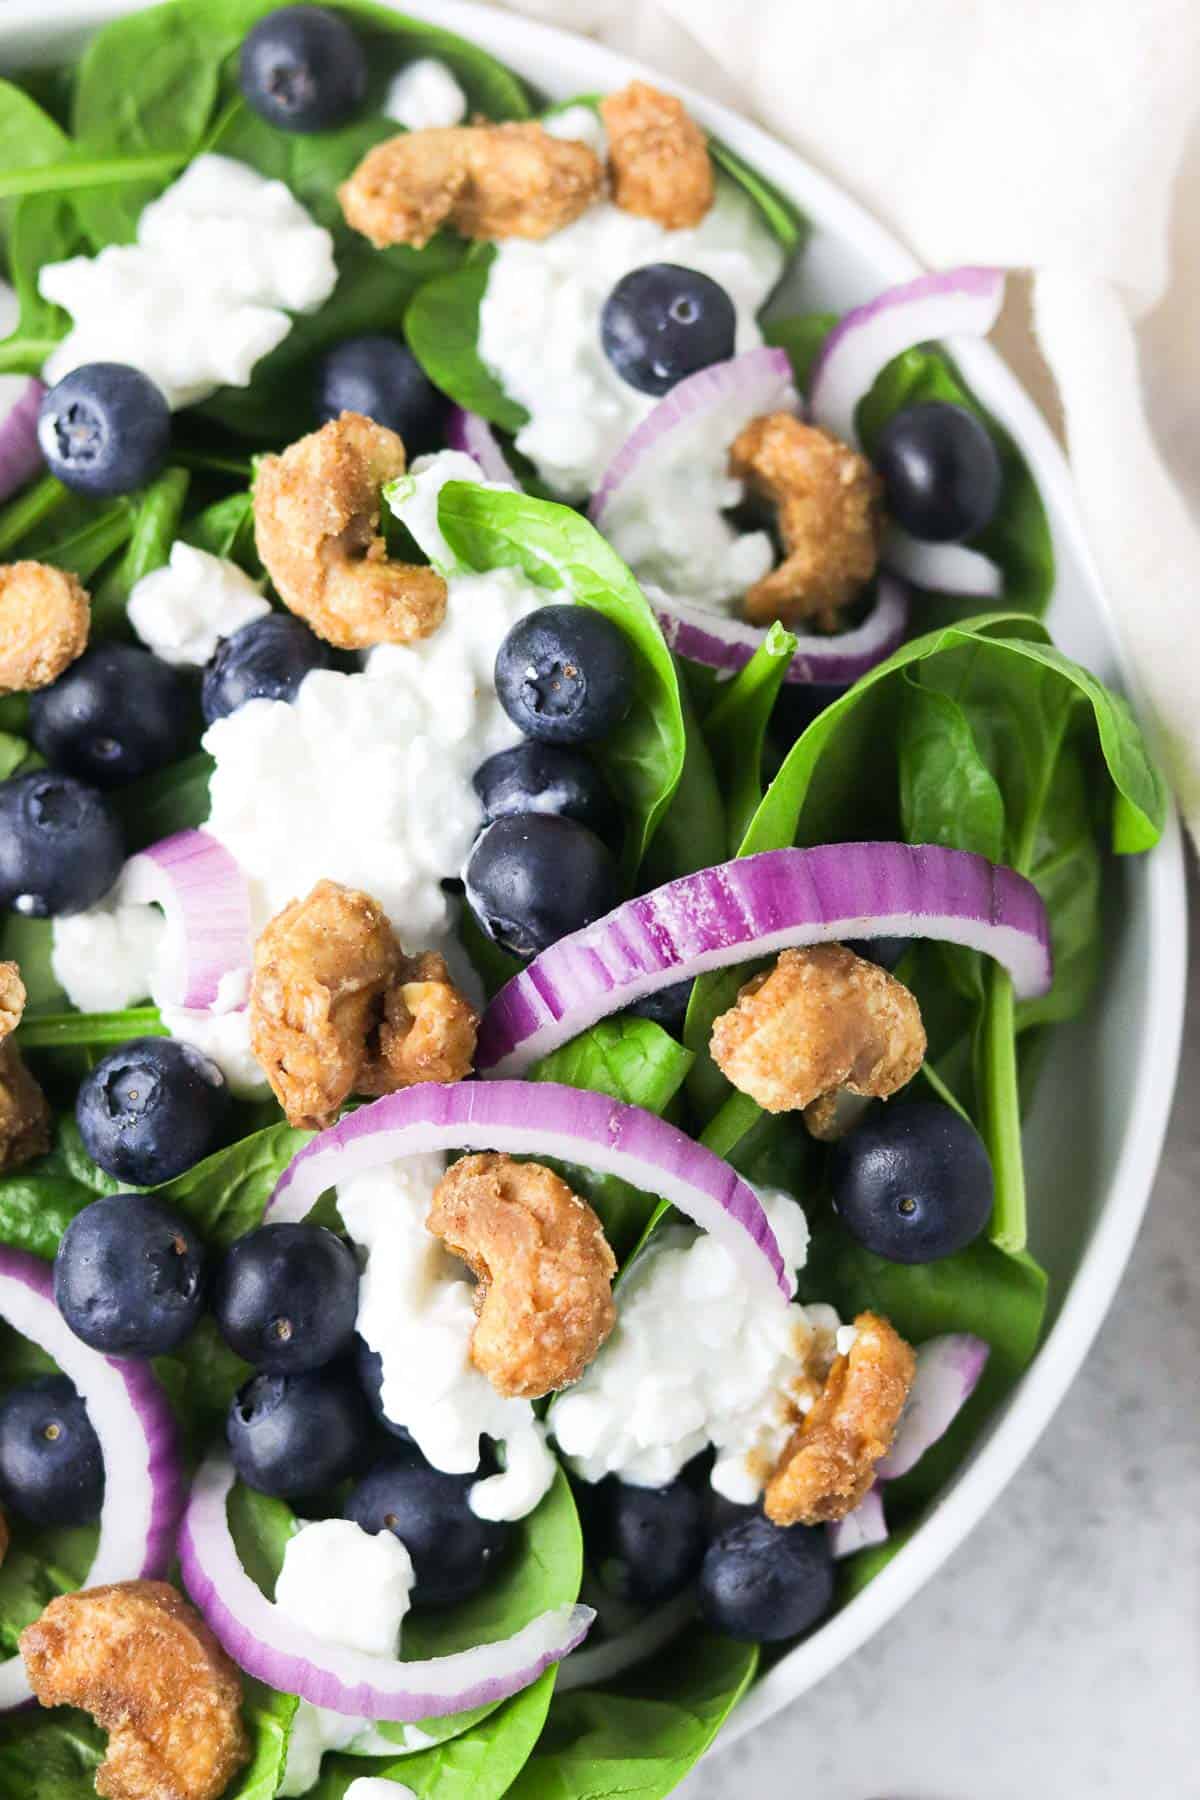 up close spinach blueberry salad with candied cashews.